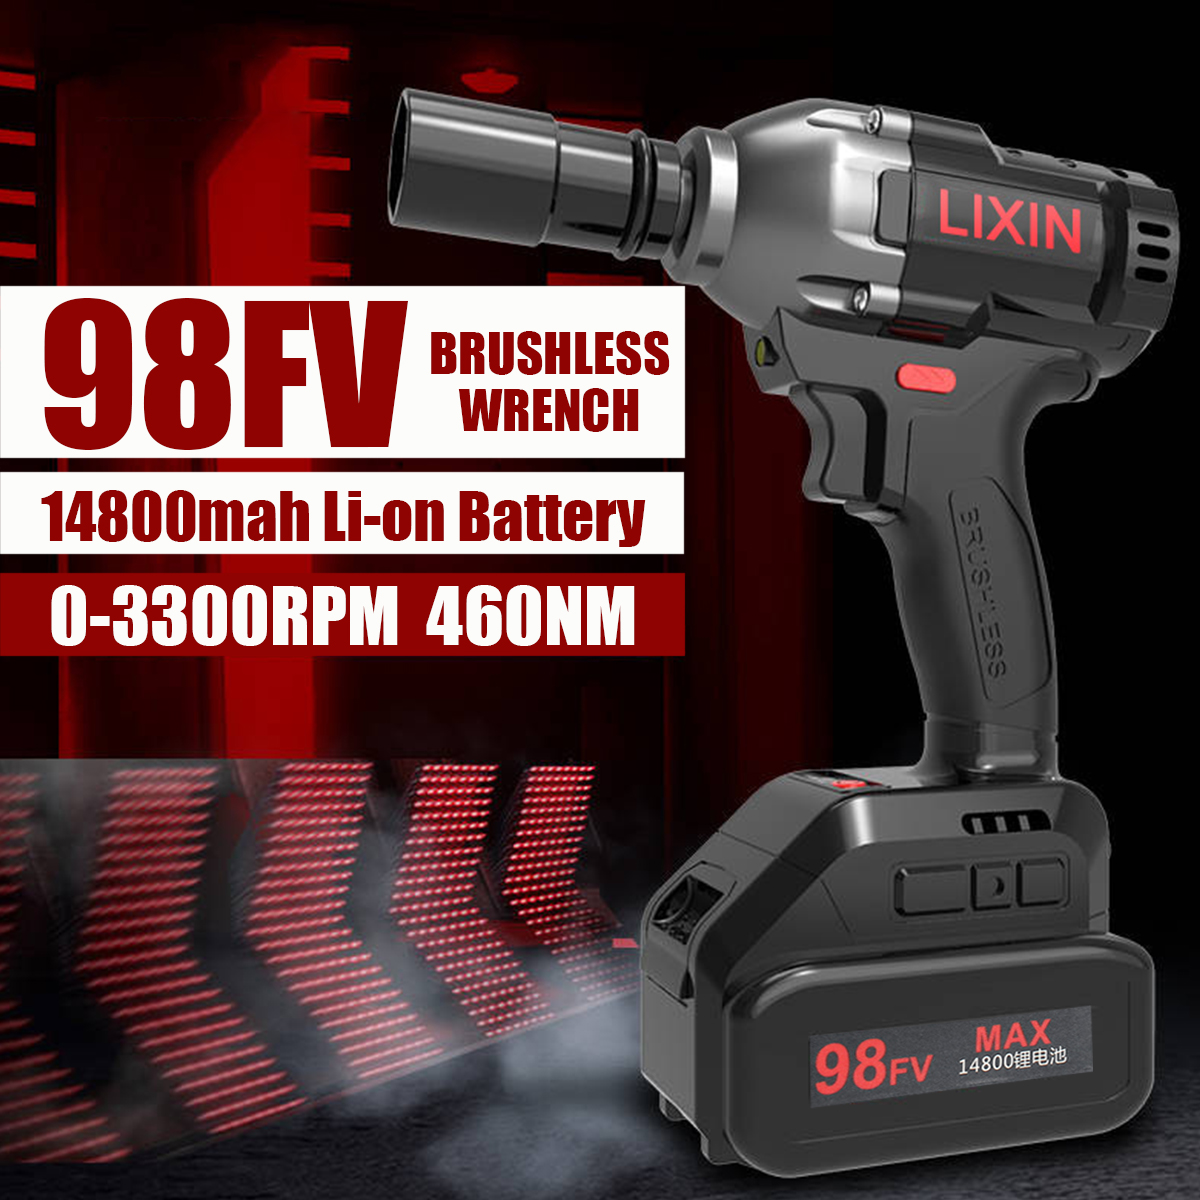 98FV 14800mAh Cordless Brushless Electric Wrench Drill LED Light W/ 1 or 2 Li-on Battery 42